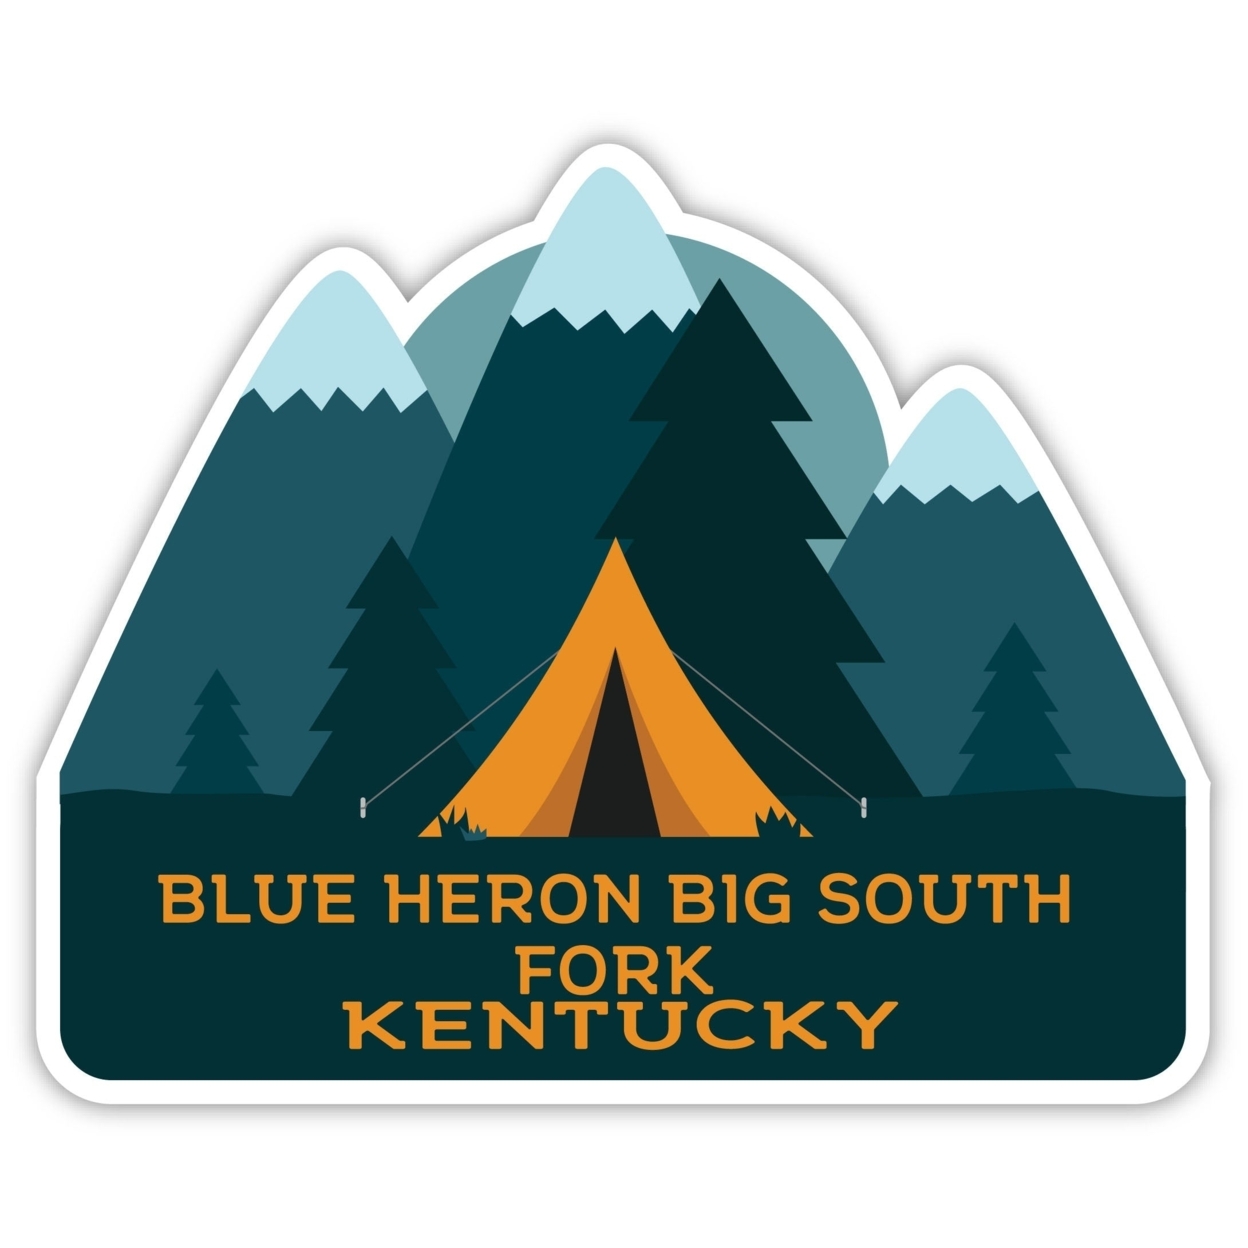 Blue Heron Big South Fork Kentucky Souvenir Decorative Stickers (Choose Theme And Size) - 4-Pack, 12-Inch, Tent